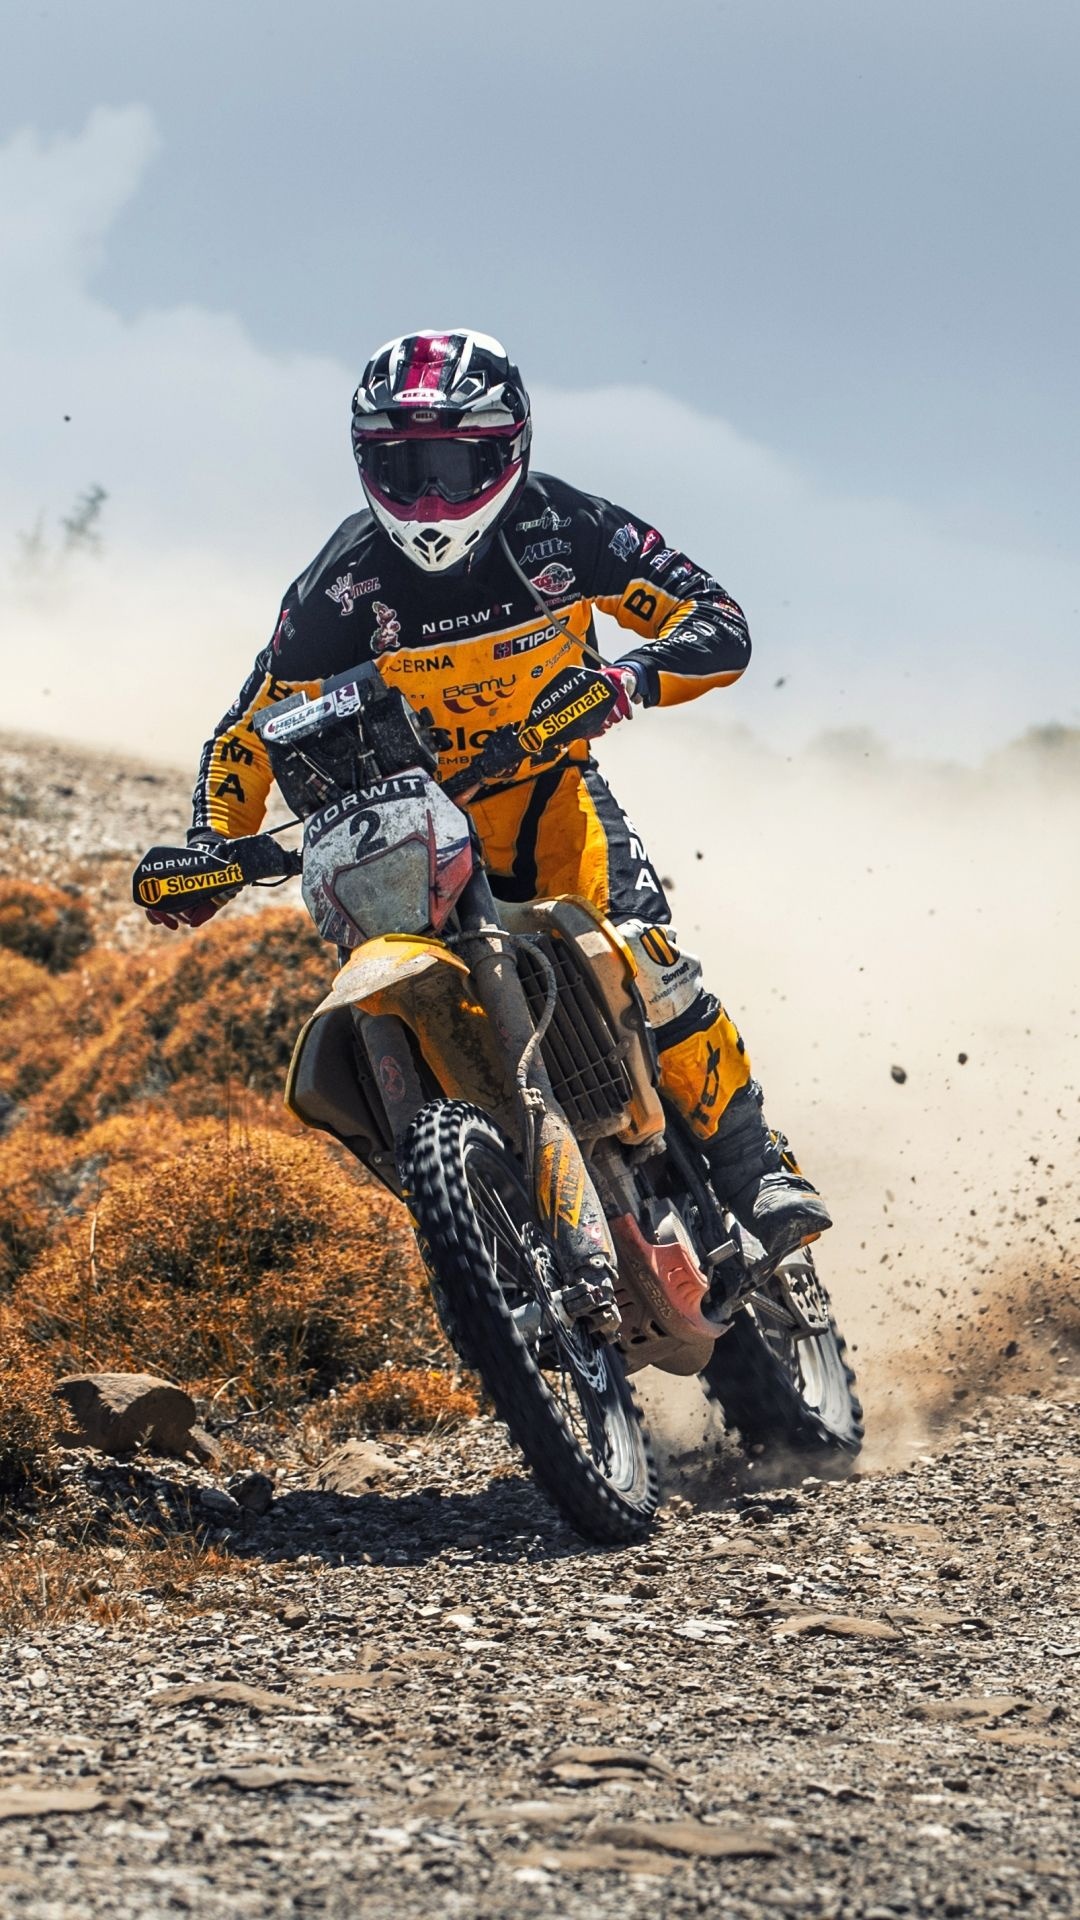 Motocross: Rocky Track, Slovenian Racer, Norwit, Extreme Sports, Motos. 1080x1920 Full HD Background.